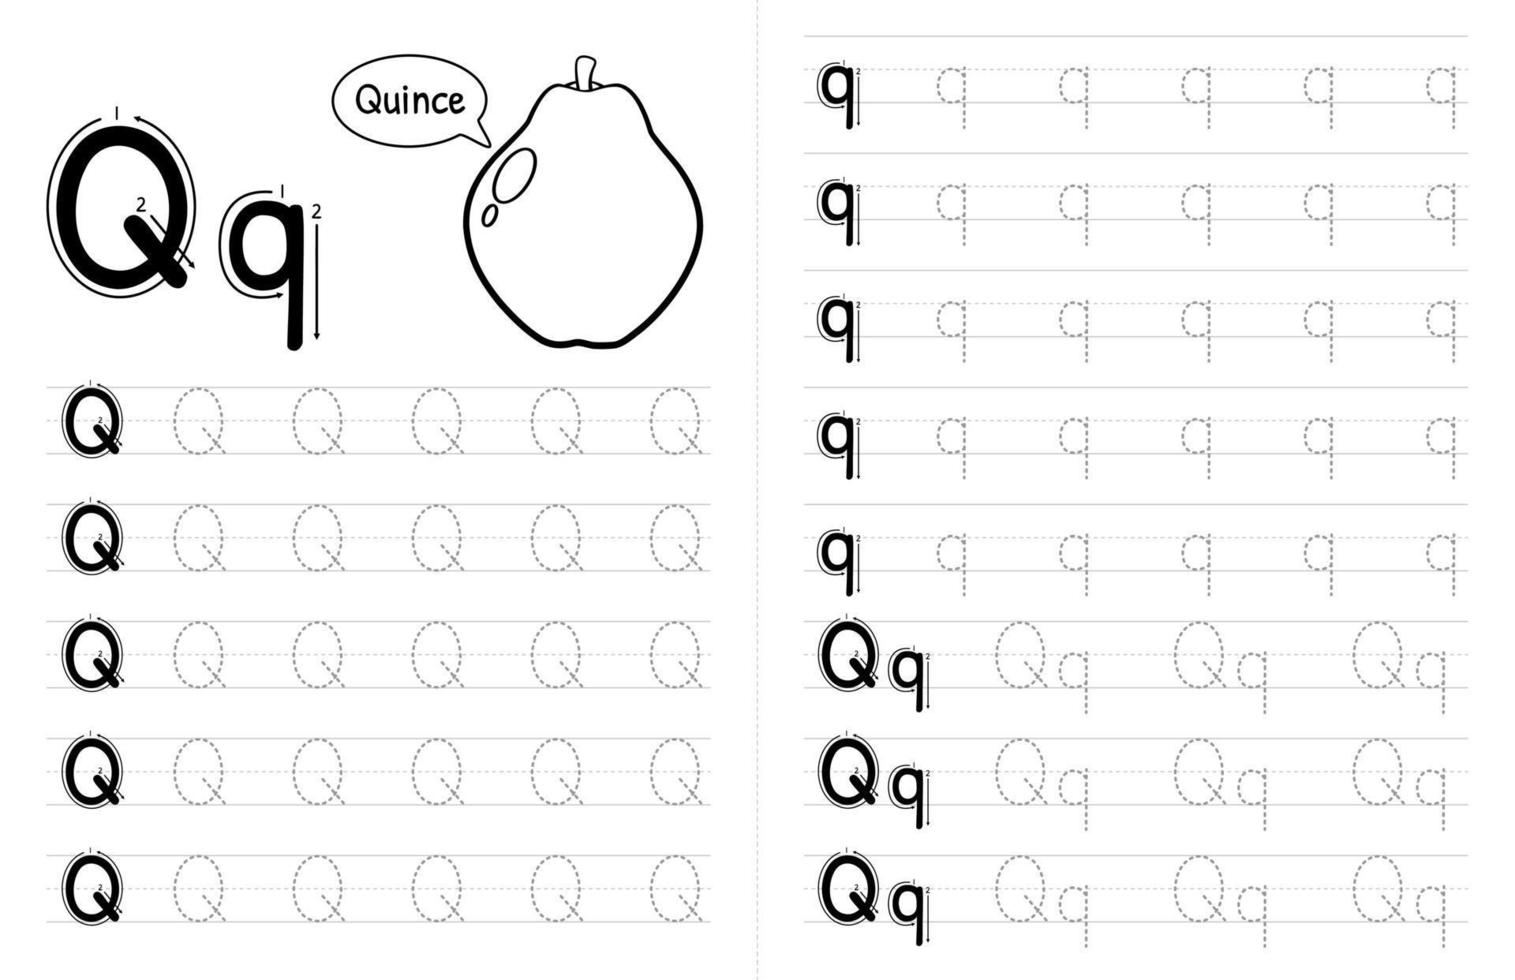 ABC Alphabets Tracing Book Interior For Kids. Children Writing Worksheet With Picture. Premium Vector Elements Letter Q.